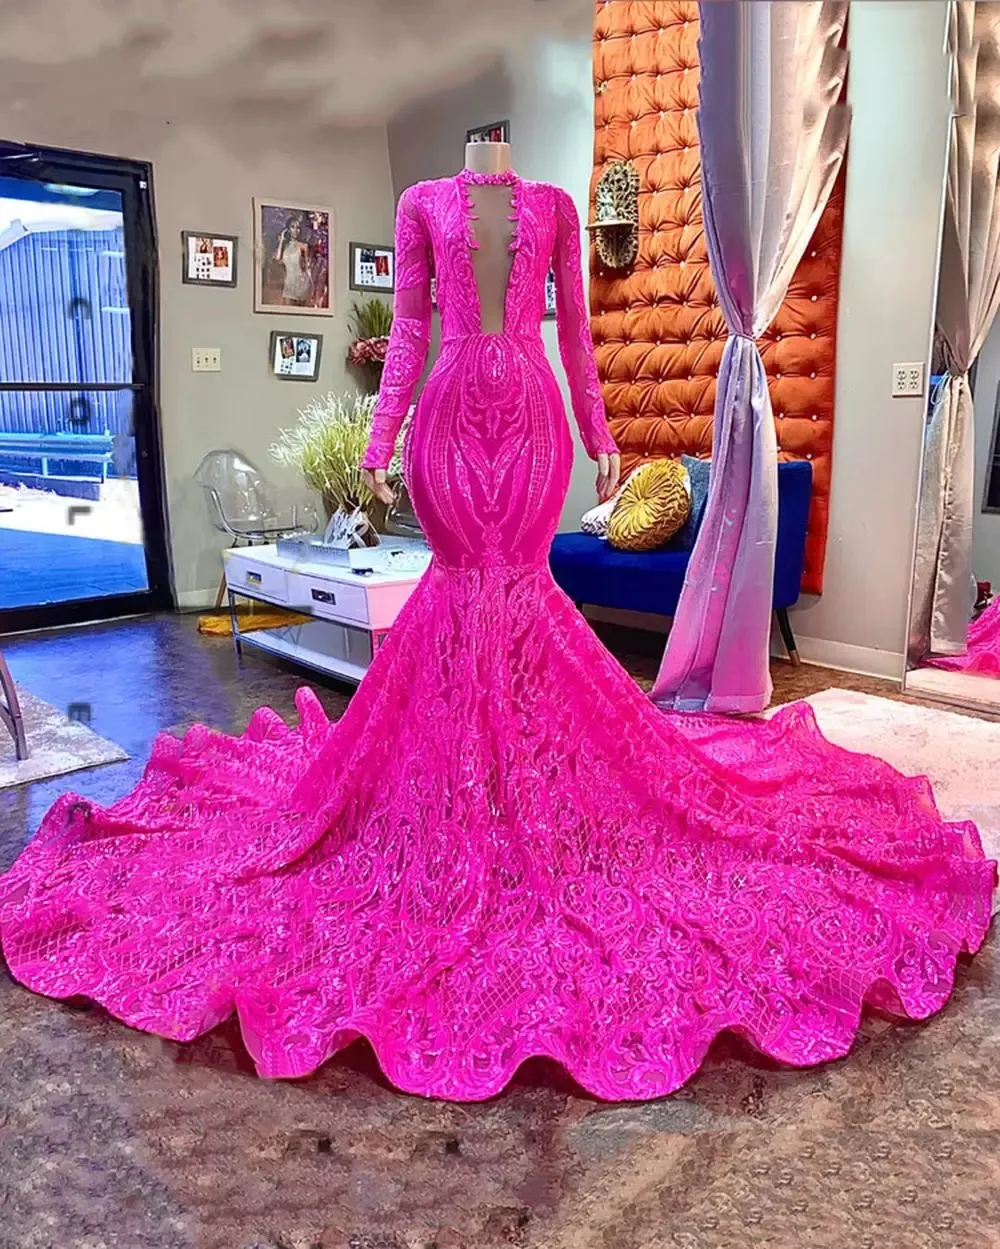 Fuchsia Mermaid Prom Dresses African Black Girl Long Sleeves Sparkly Sequin Lace Party Evening Dress Bc15052 0419